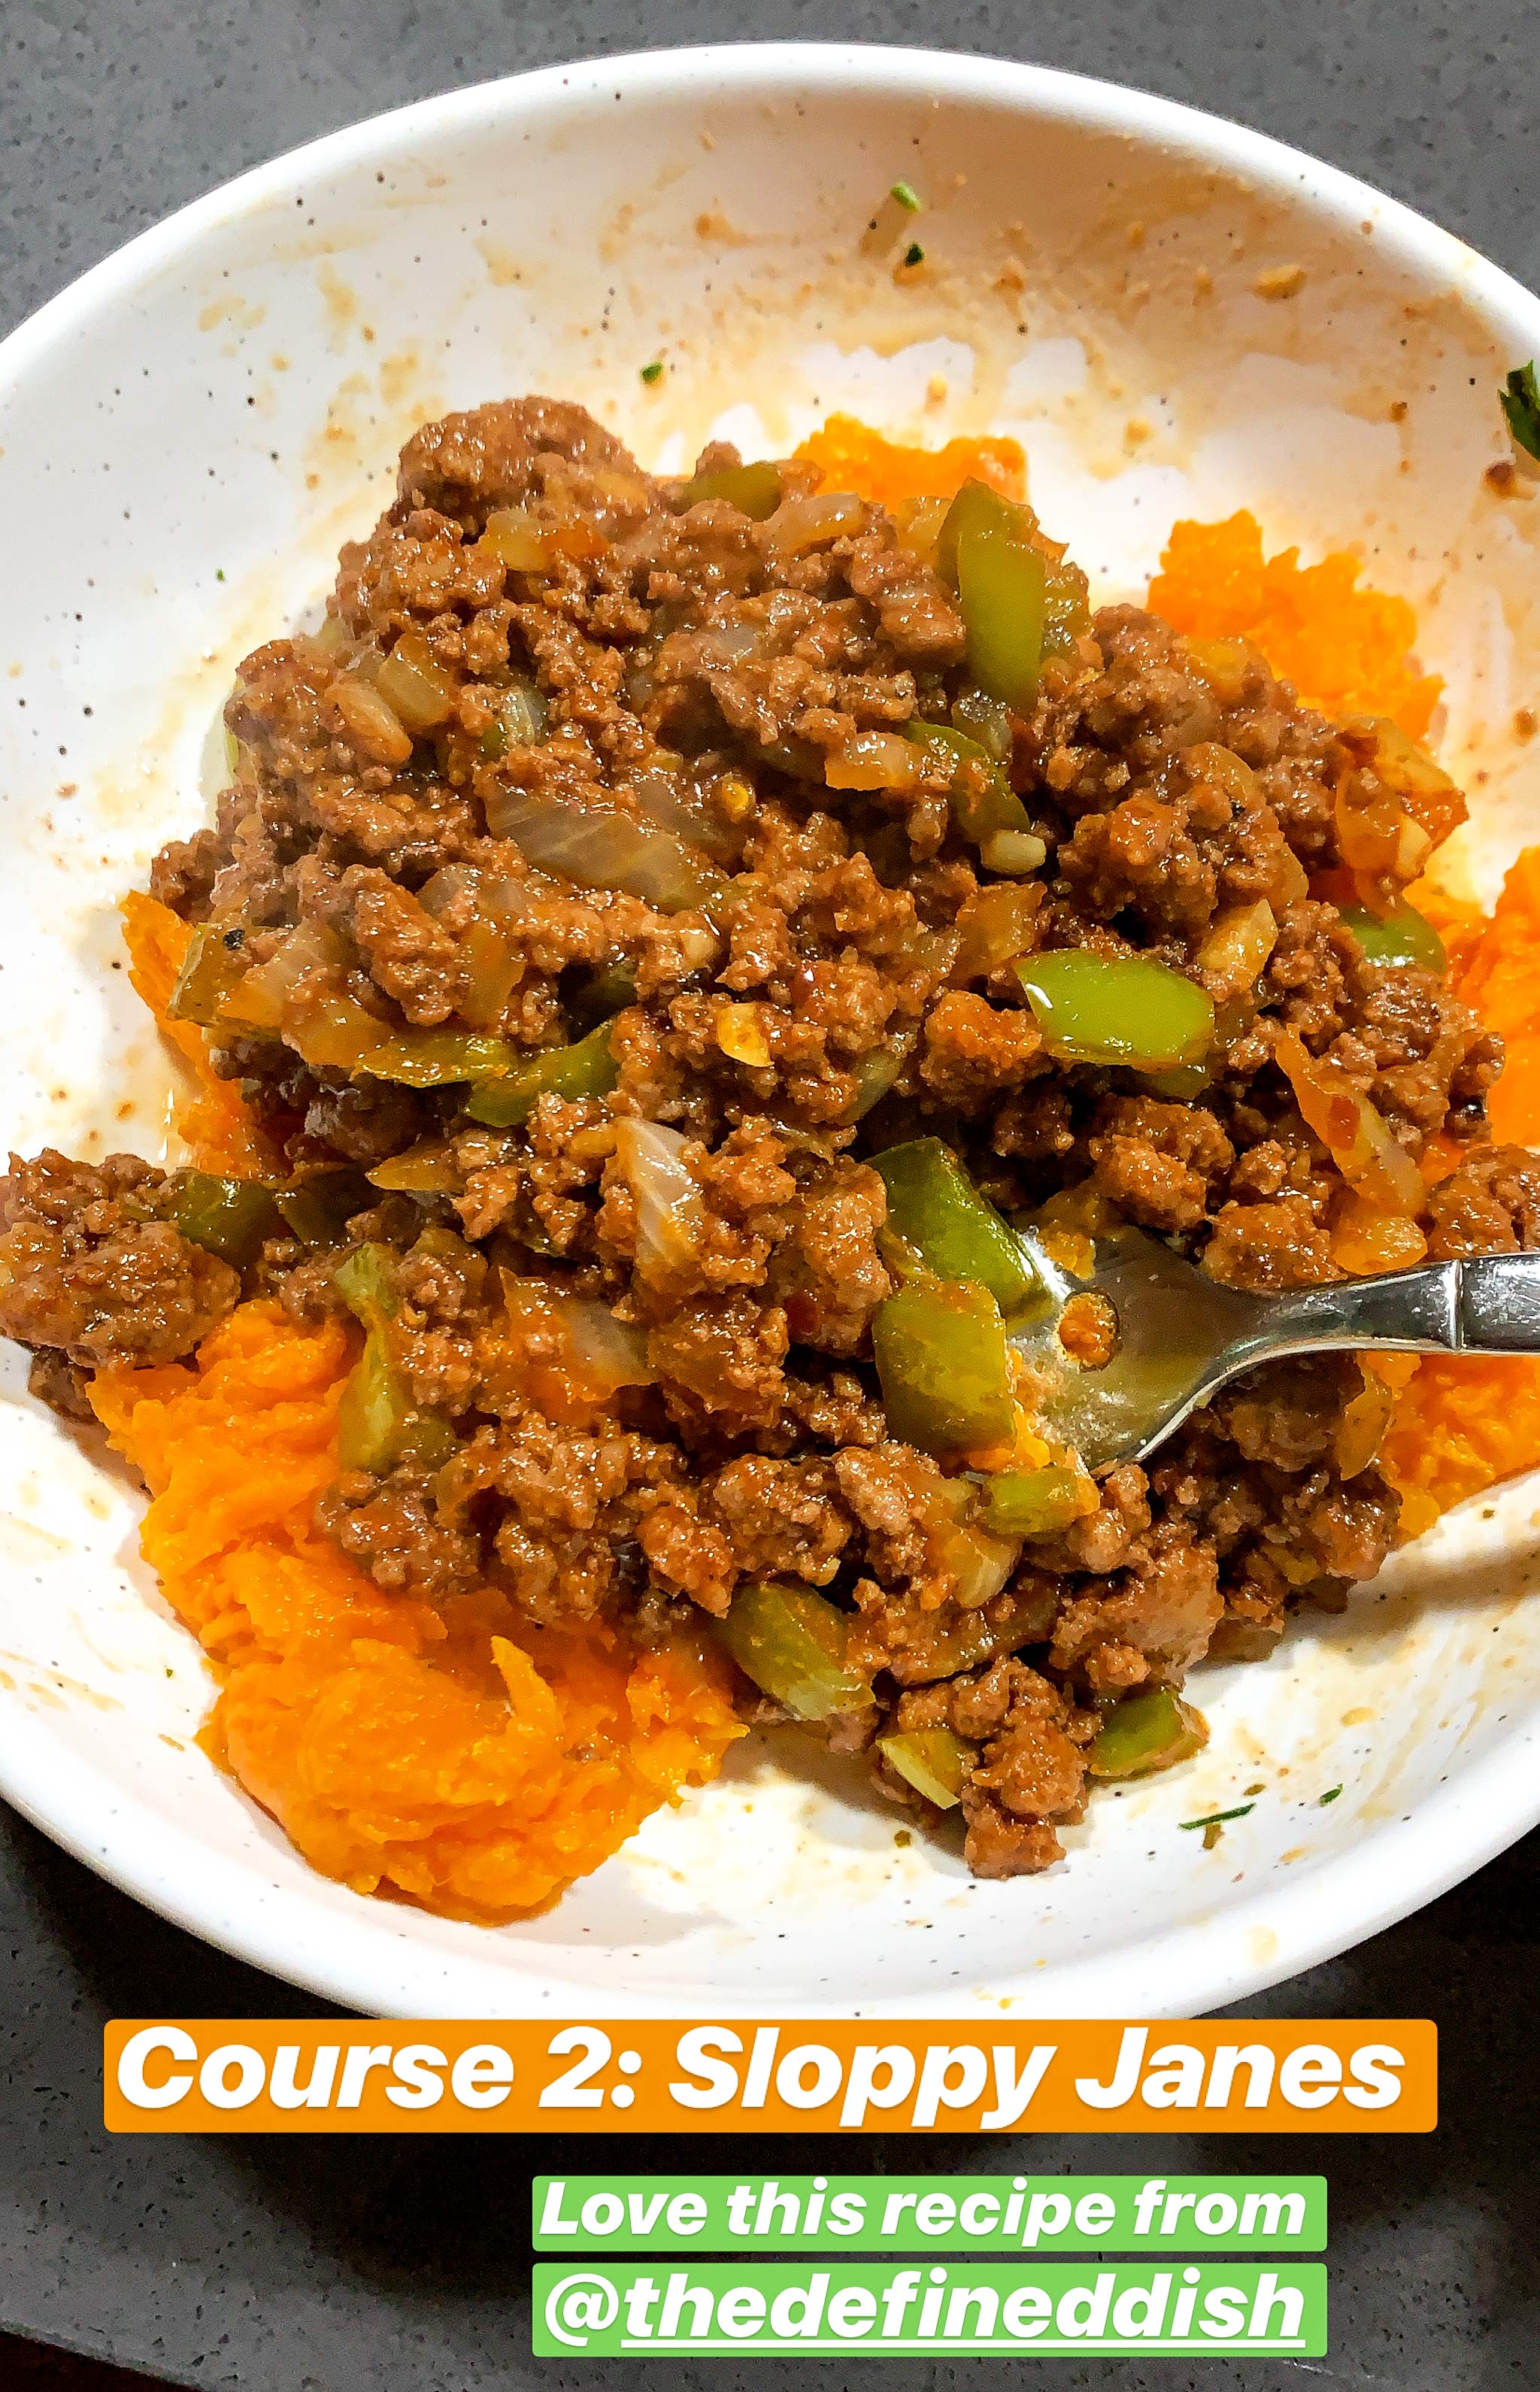 whole30 sloppy janes - one of our favorite whole30 dinner recipes